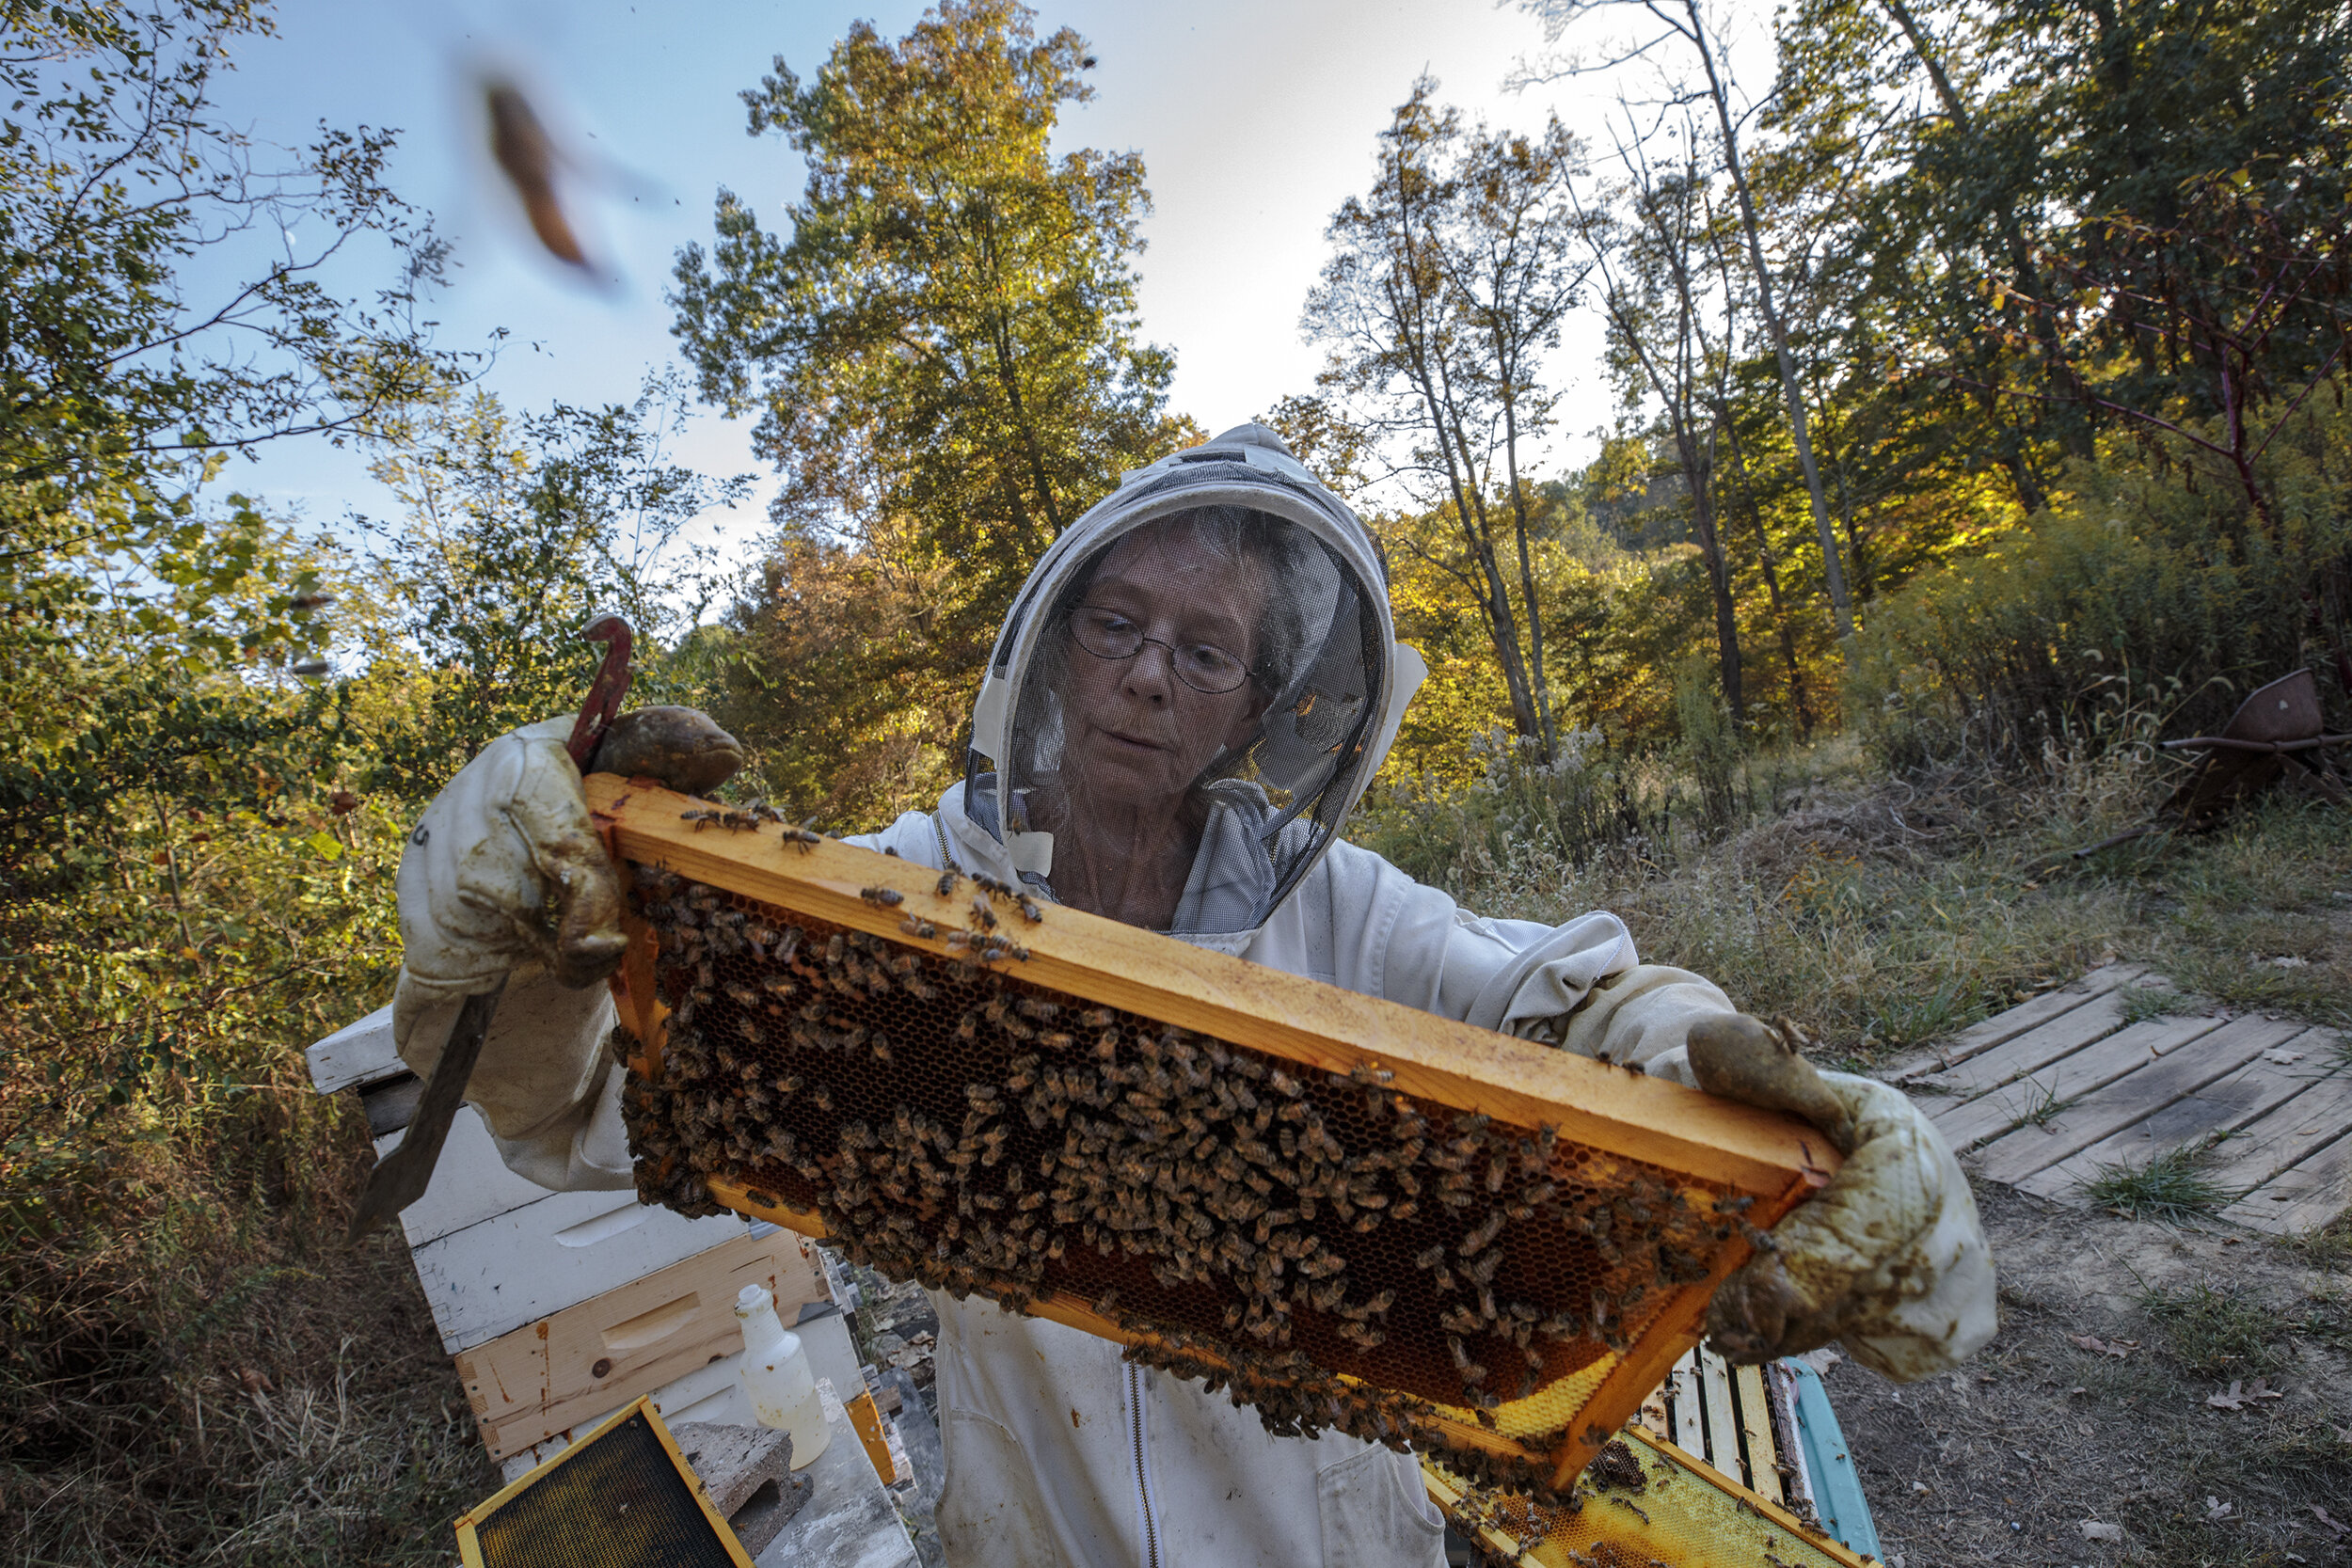  Angie Hubbard tends to her beehive frames, checking for yellow jackets after a recent attack and locating the queen to make sure she is still alive at her hive in Racine, Ohio, on October 4th, 2019. In addition to selling honey, Hubbard also sells f